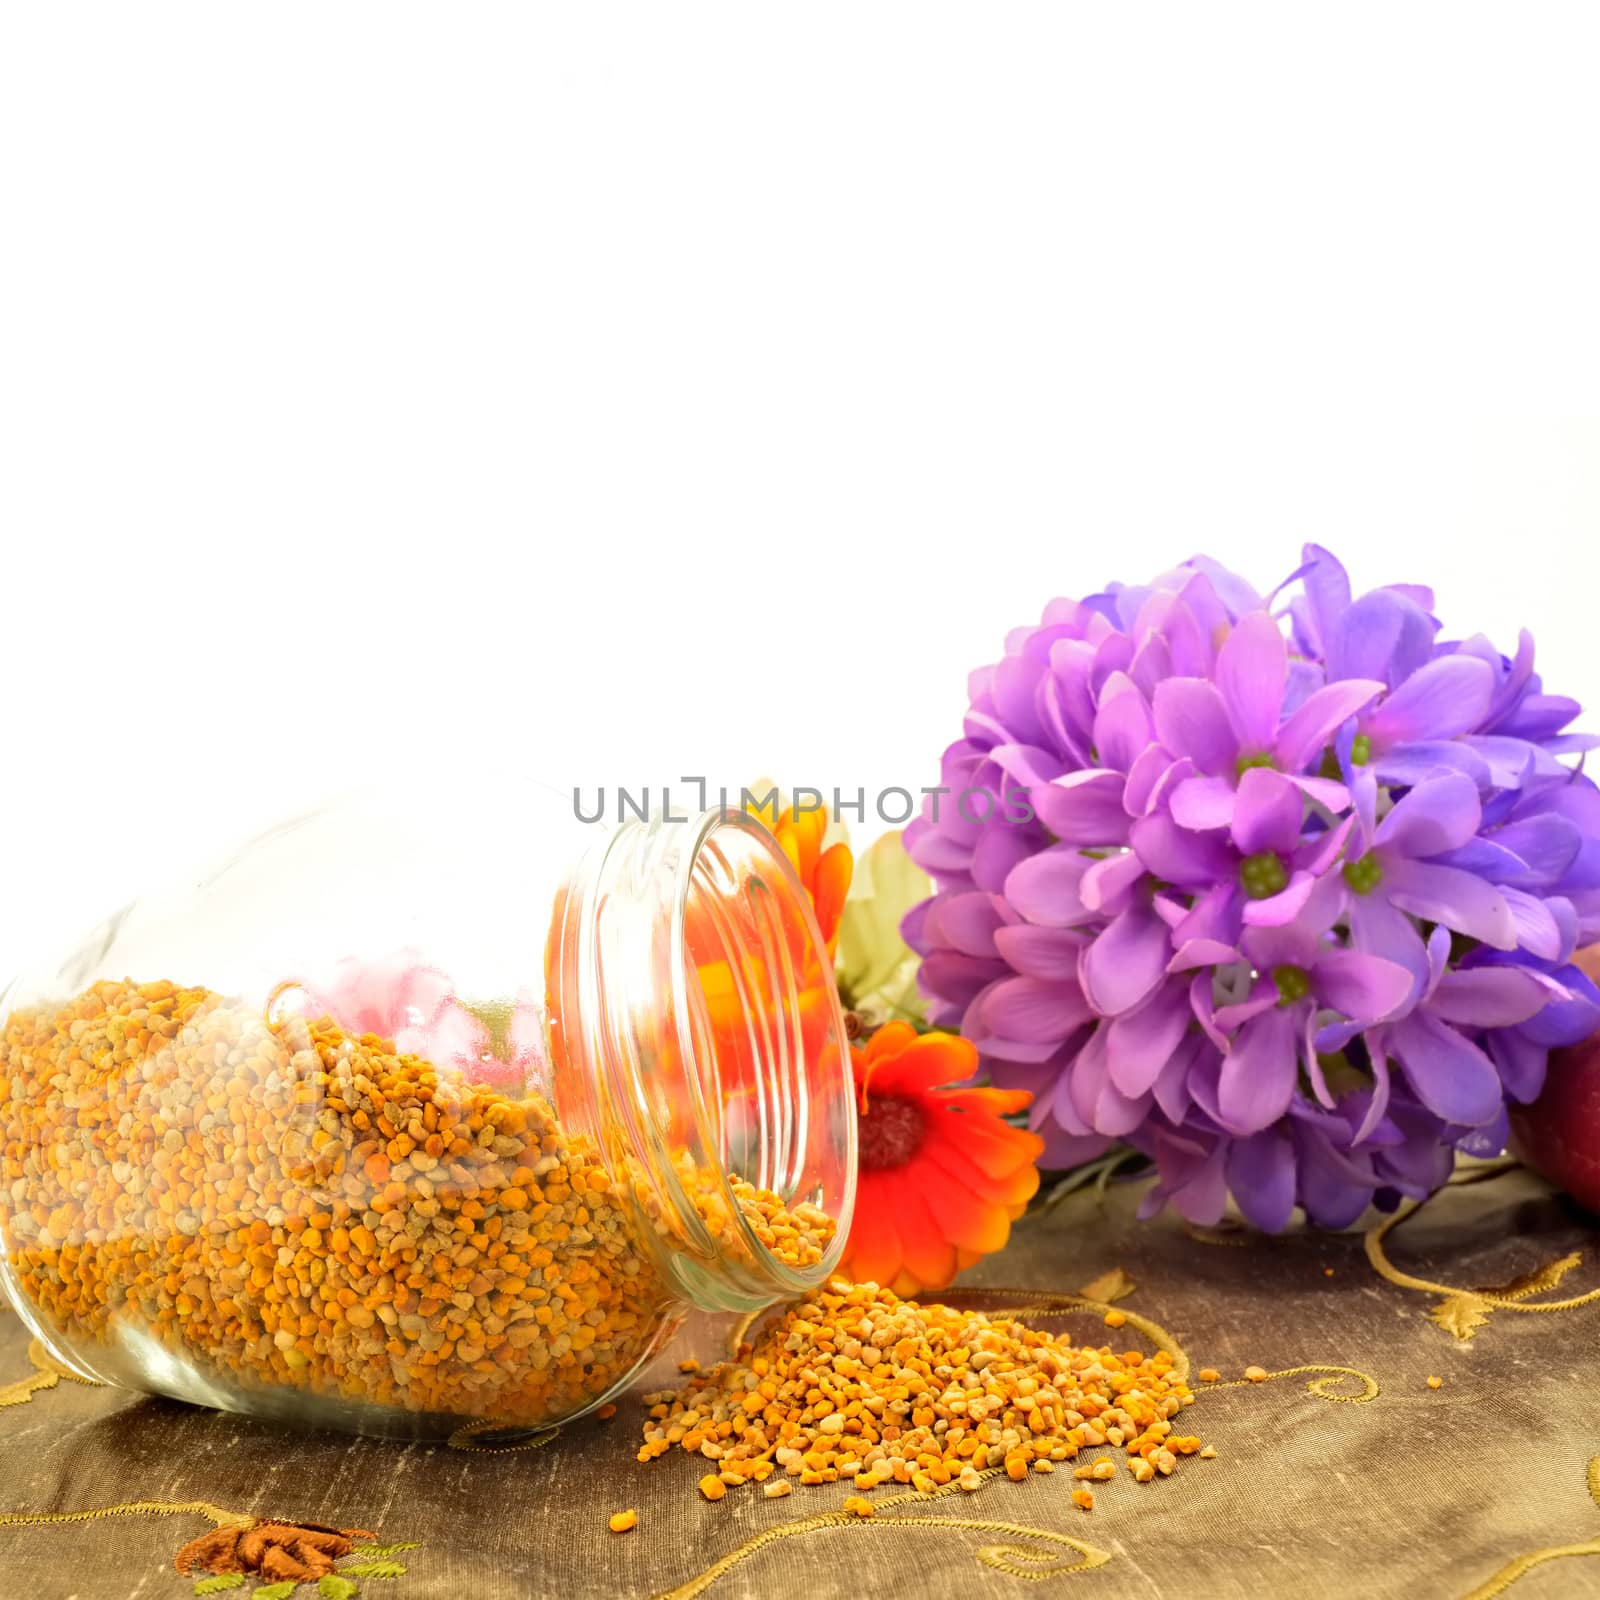 Bee pollen in glass jar and flowers copy space for text